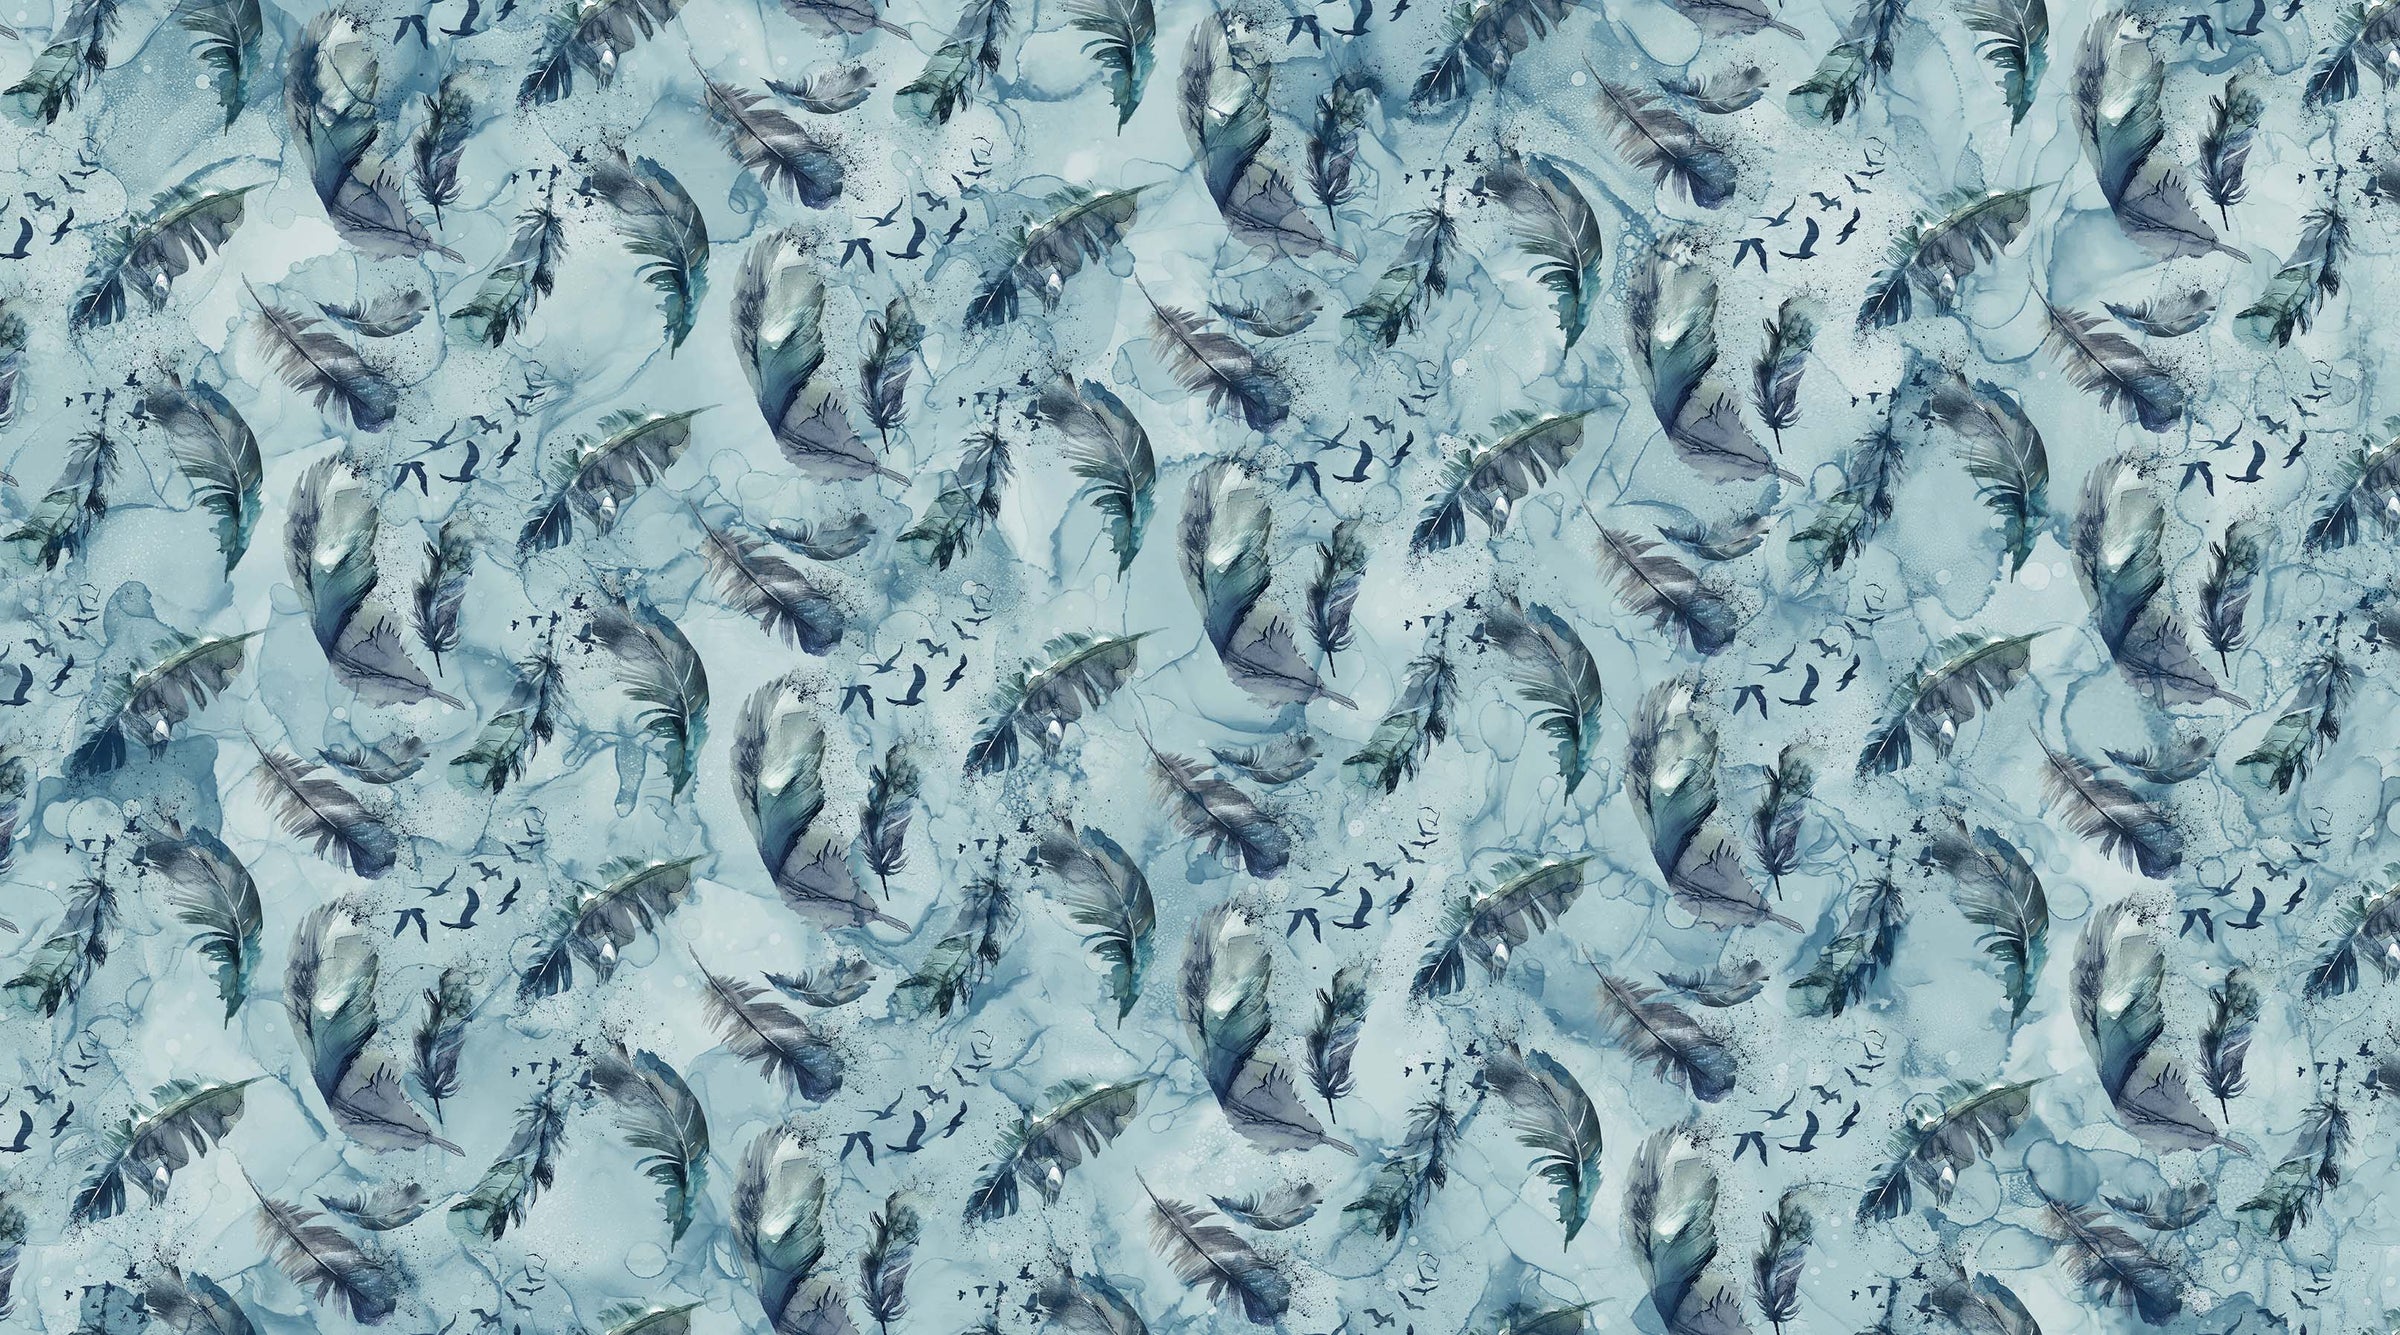 Soar Quilt Fabric - Feathers in Moody Blues Dark - DP24584-44